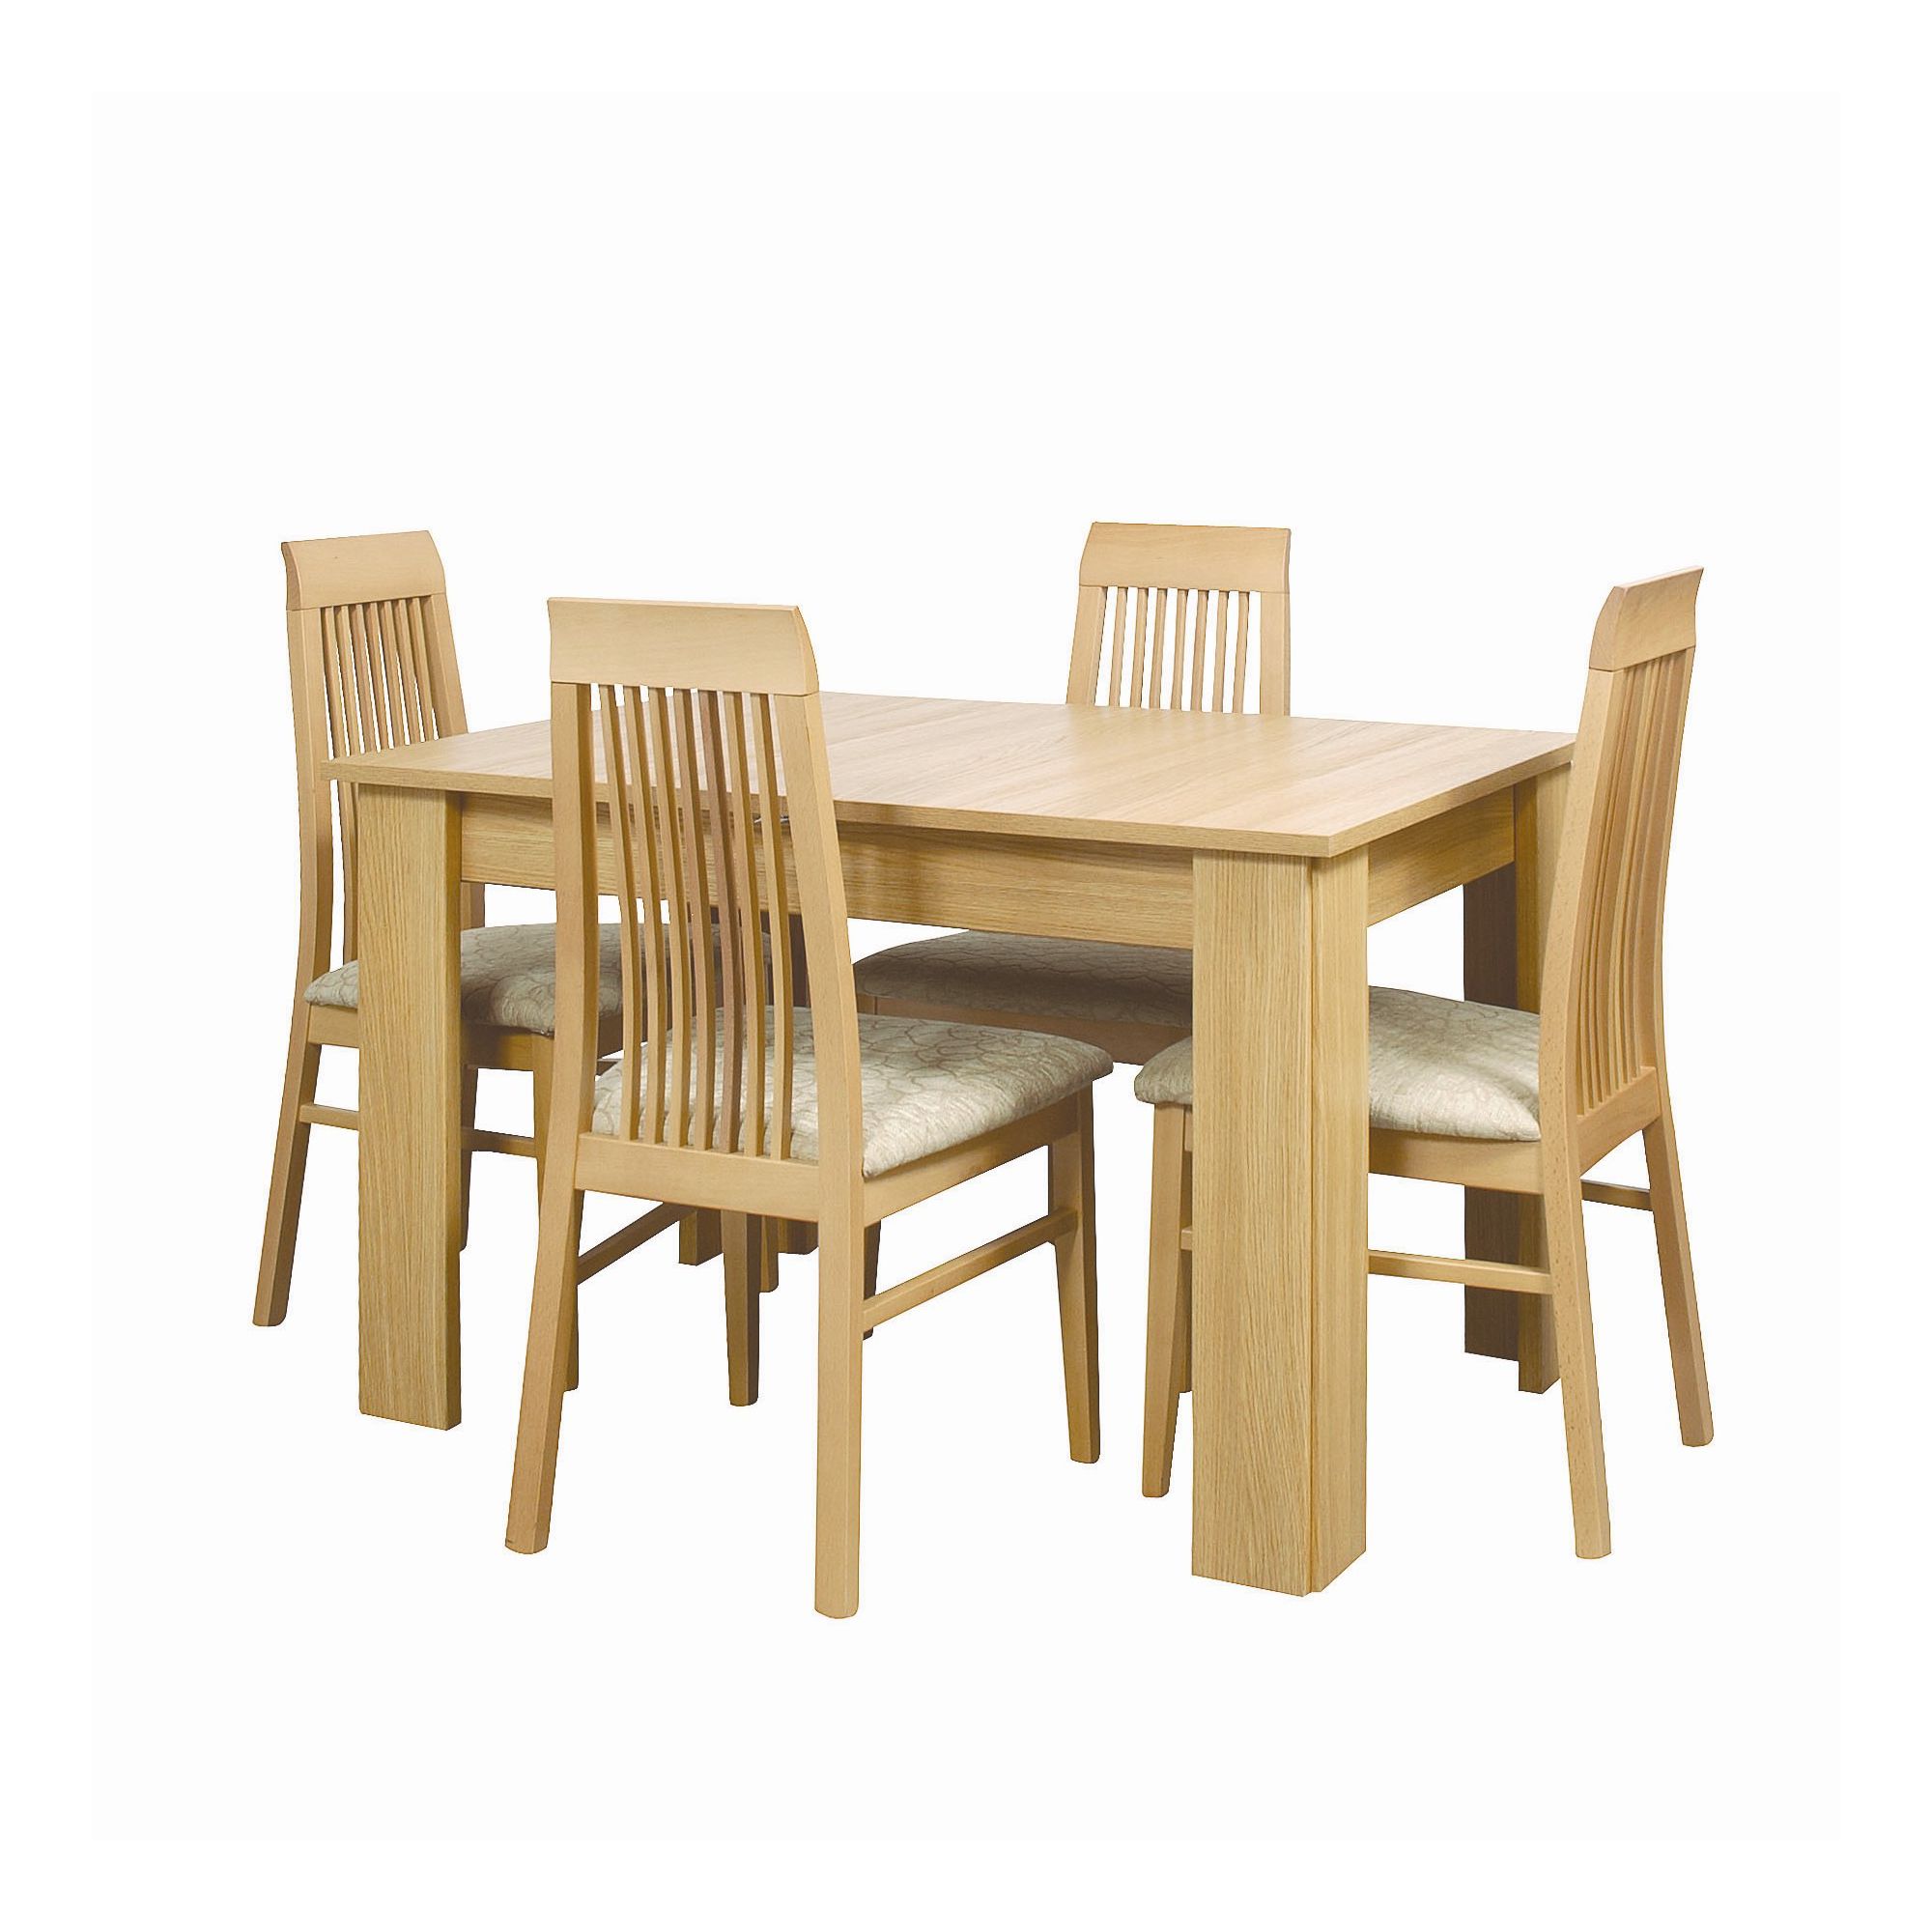 Caxton Huxley Dining Table Set with 4 Slatted Back Dining Chairs in Light Oak at Tesco Direct